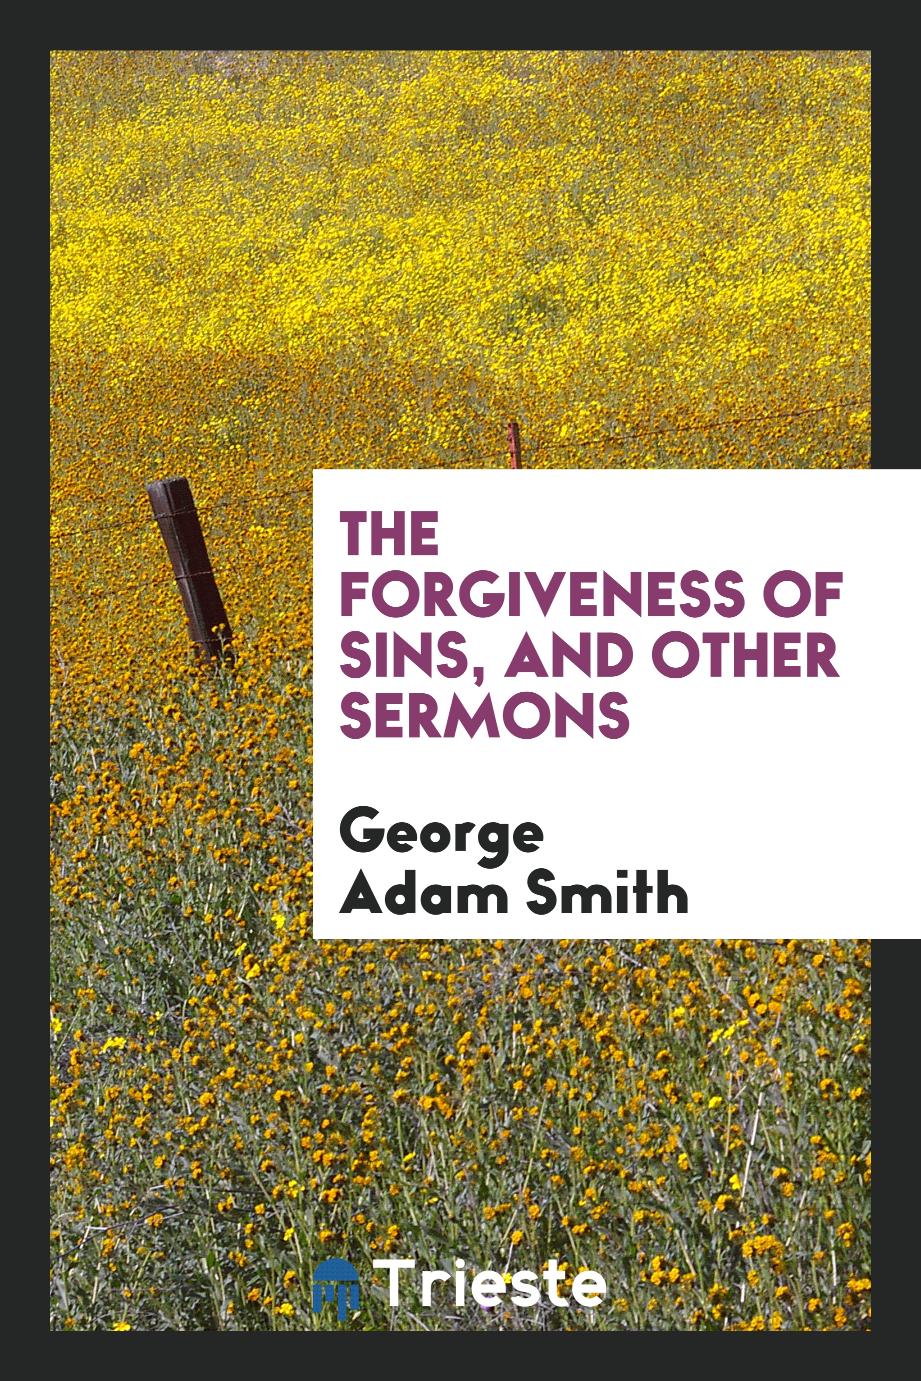 The forgiveness of sins, and other sermons